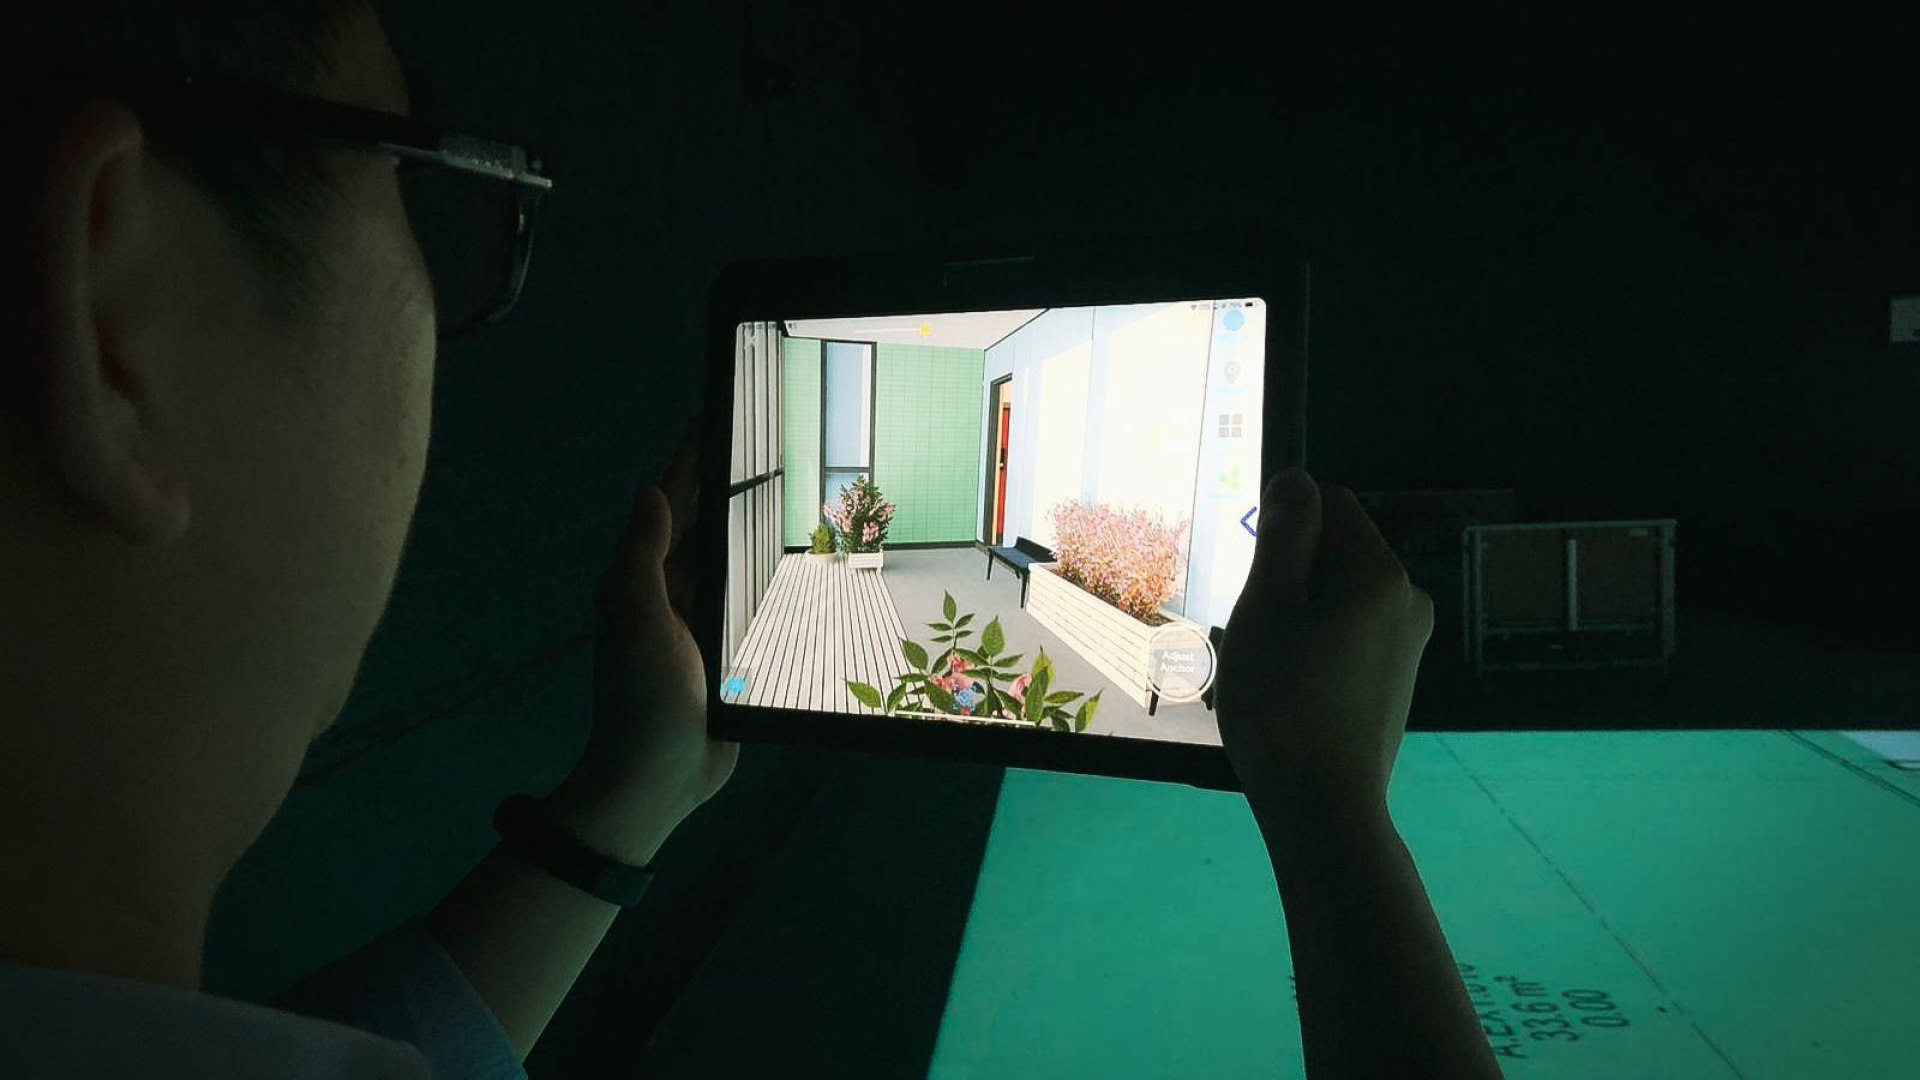 Using AR you're able to see your homes design and walkthrough it.